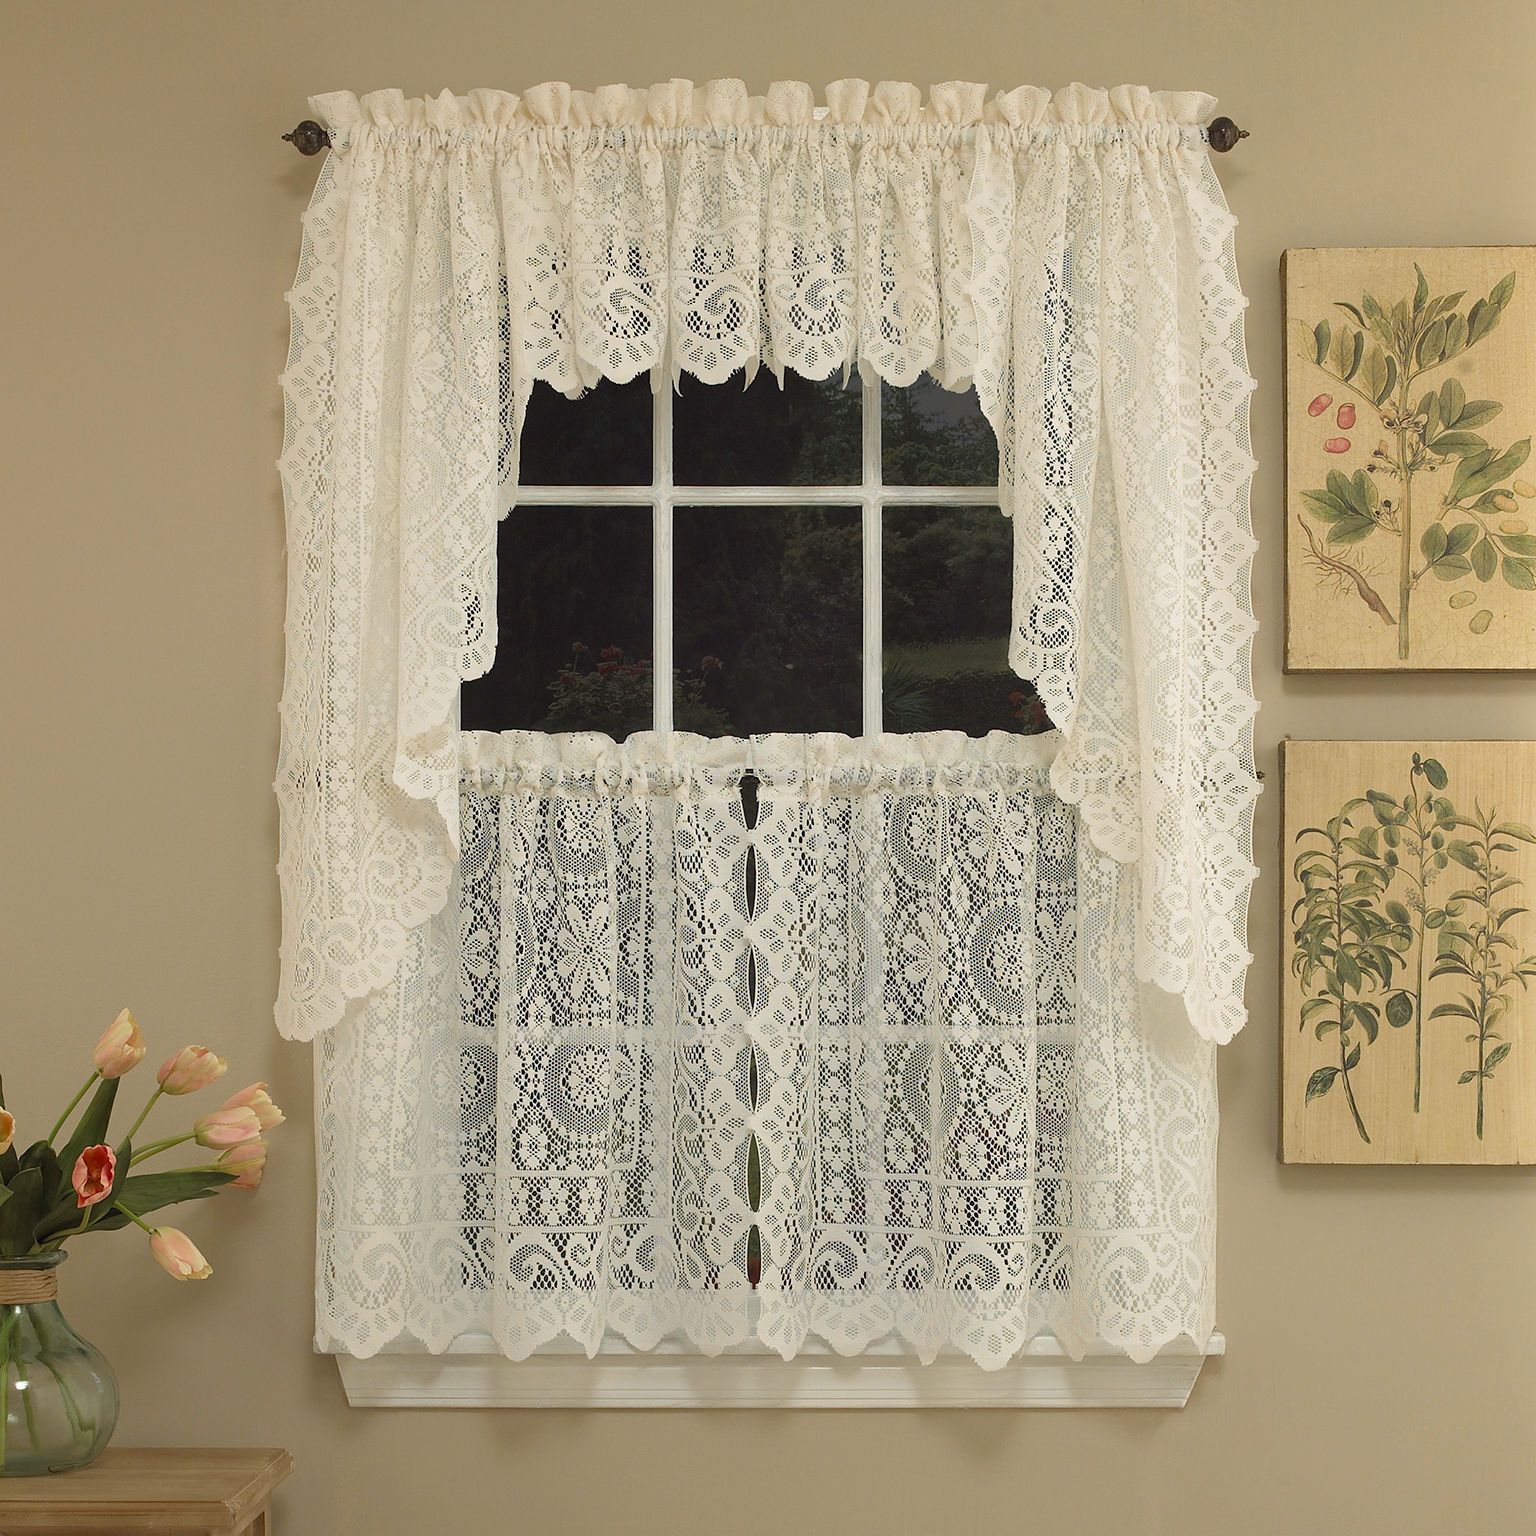 Hopewell Heavy Cream Lace Kitchen Curtain Choice Of Tier Valance Or Swag With Luxurious Kitchen Curtains Tiers, Shade Or Valances (View 5 of 20)